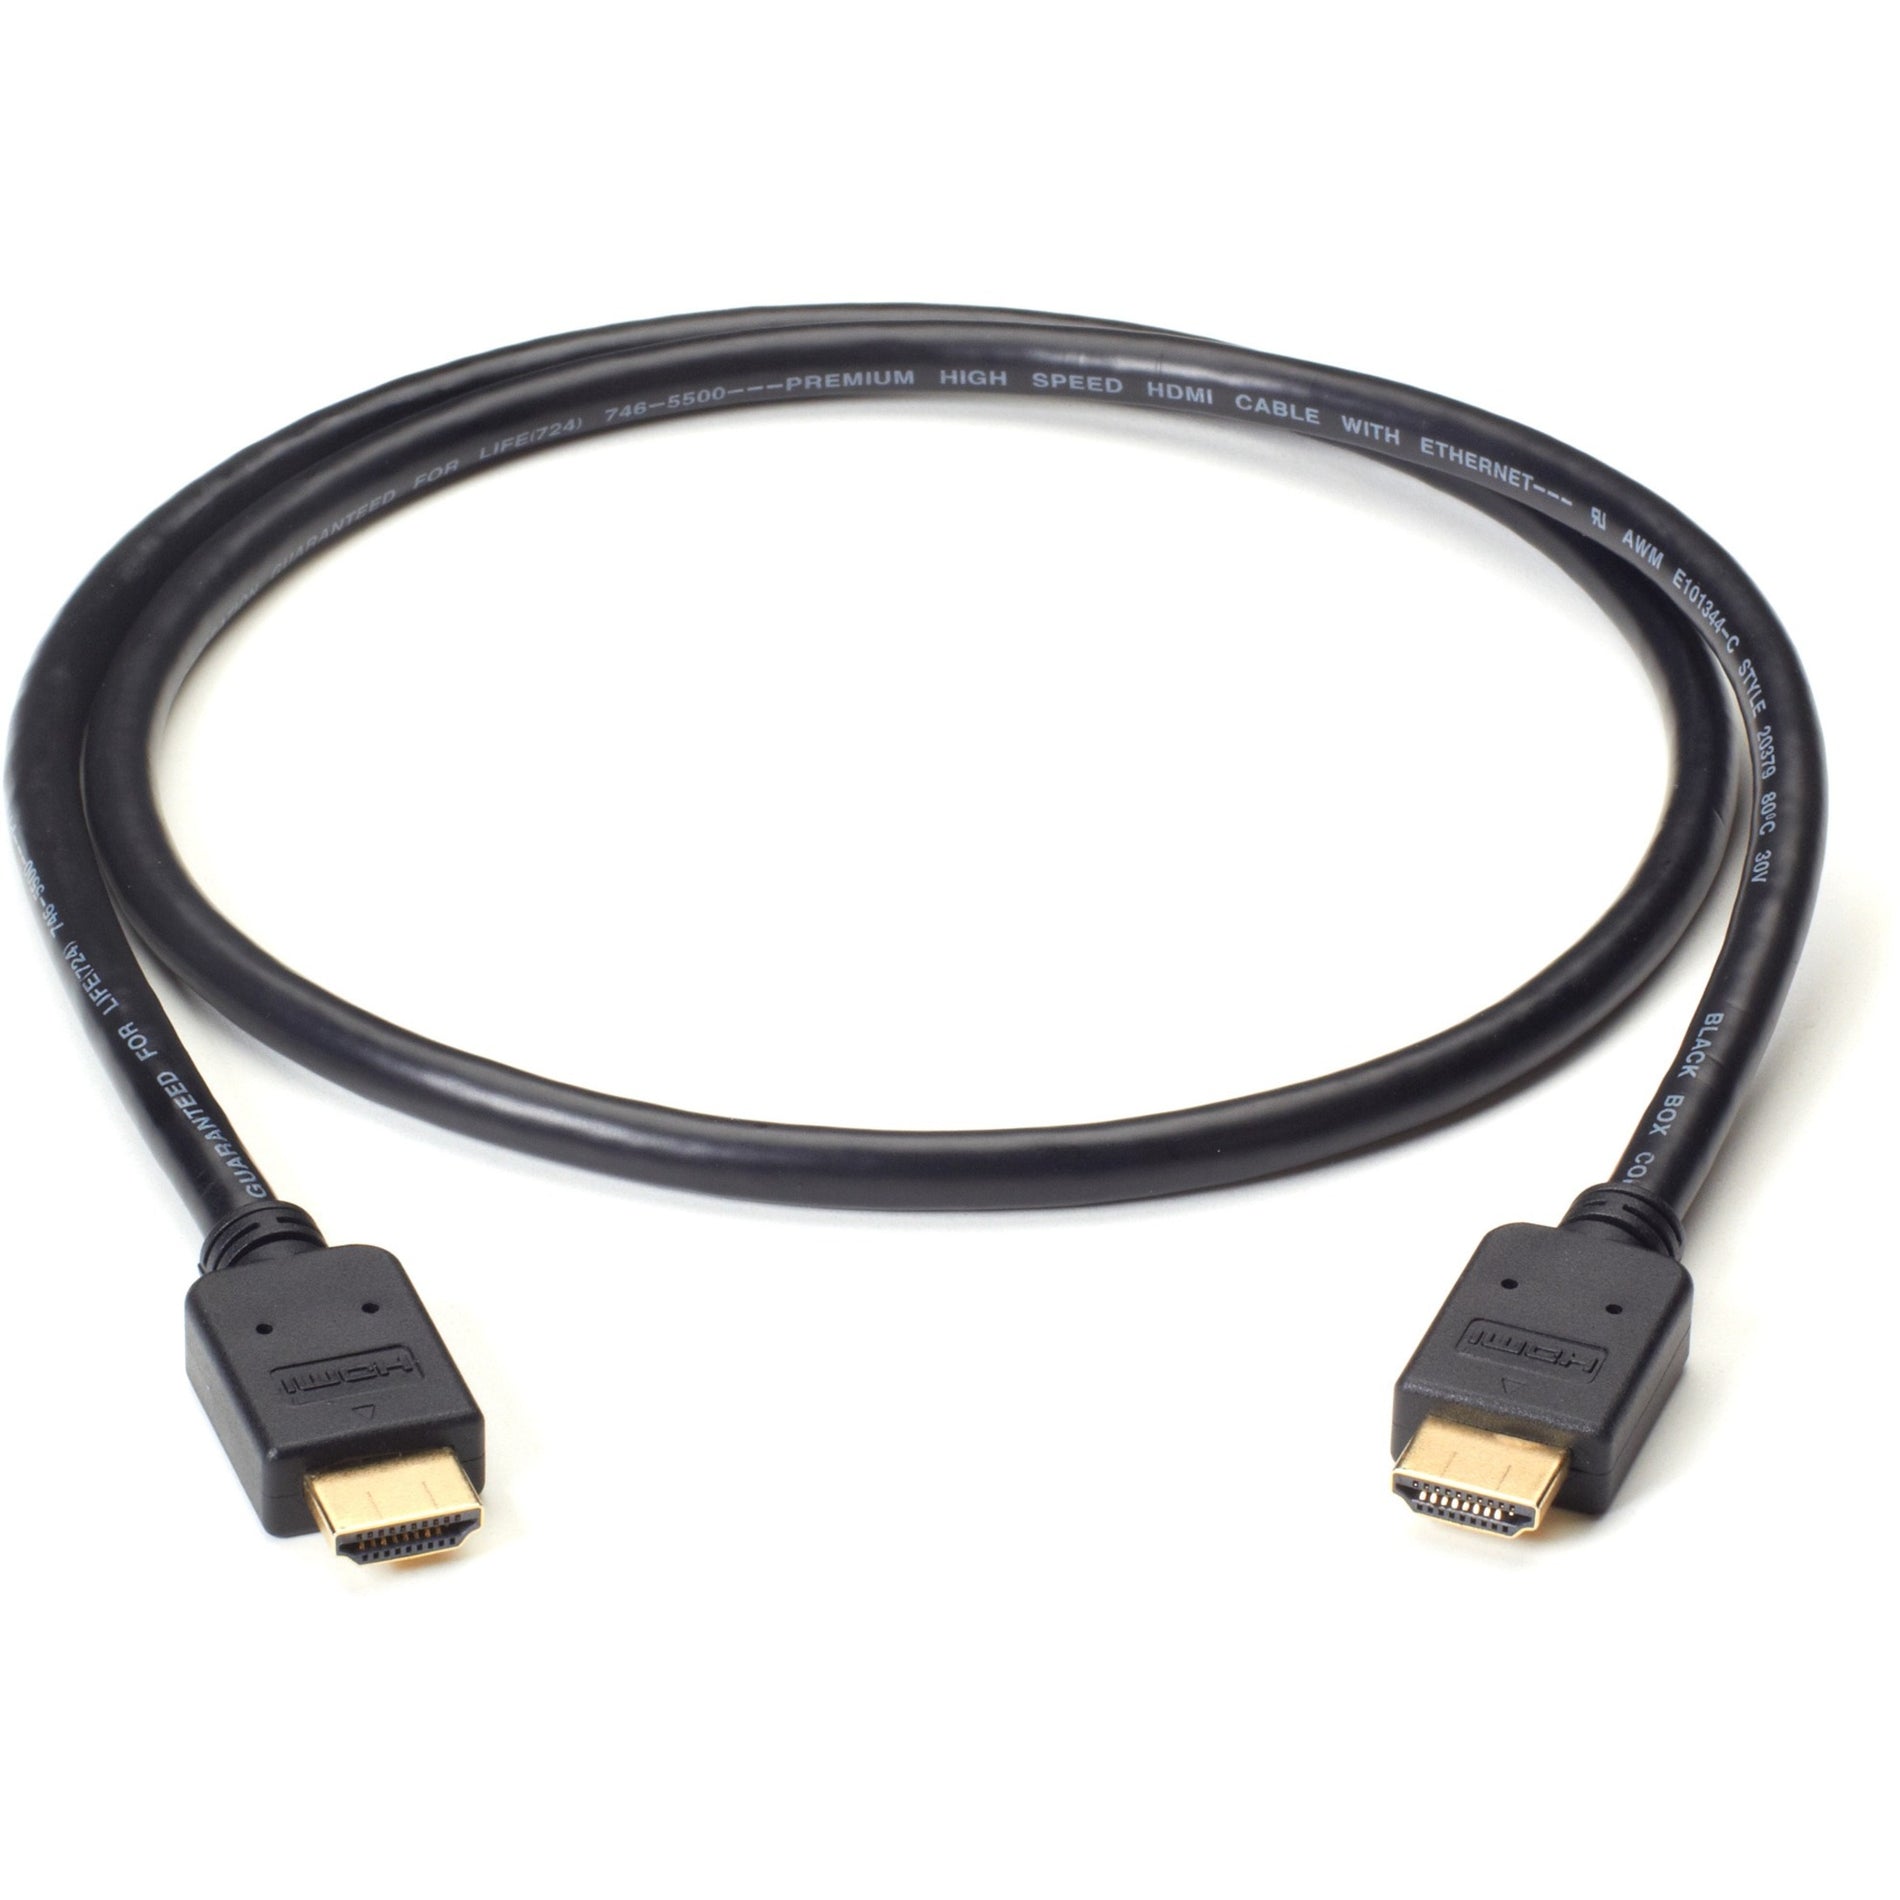 Black Box VCB-HDMI-001M High-Speed HDMI Cable with Ethernet, 1m (3.2ft.), Premium M/M